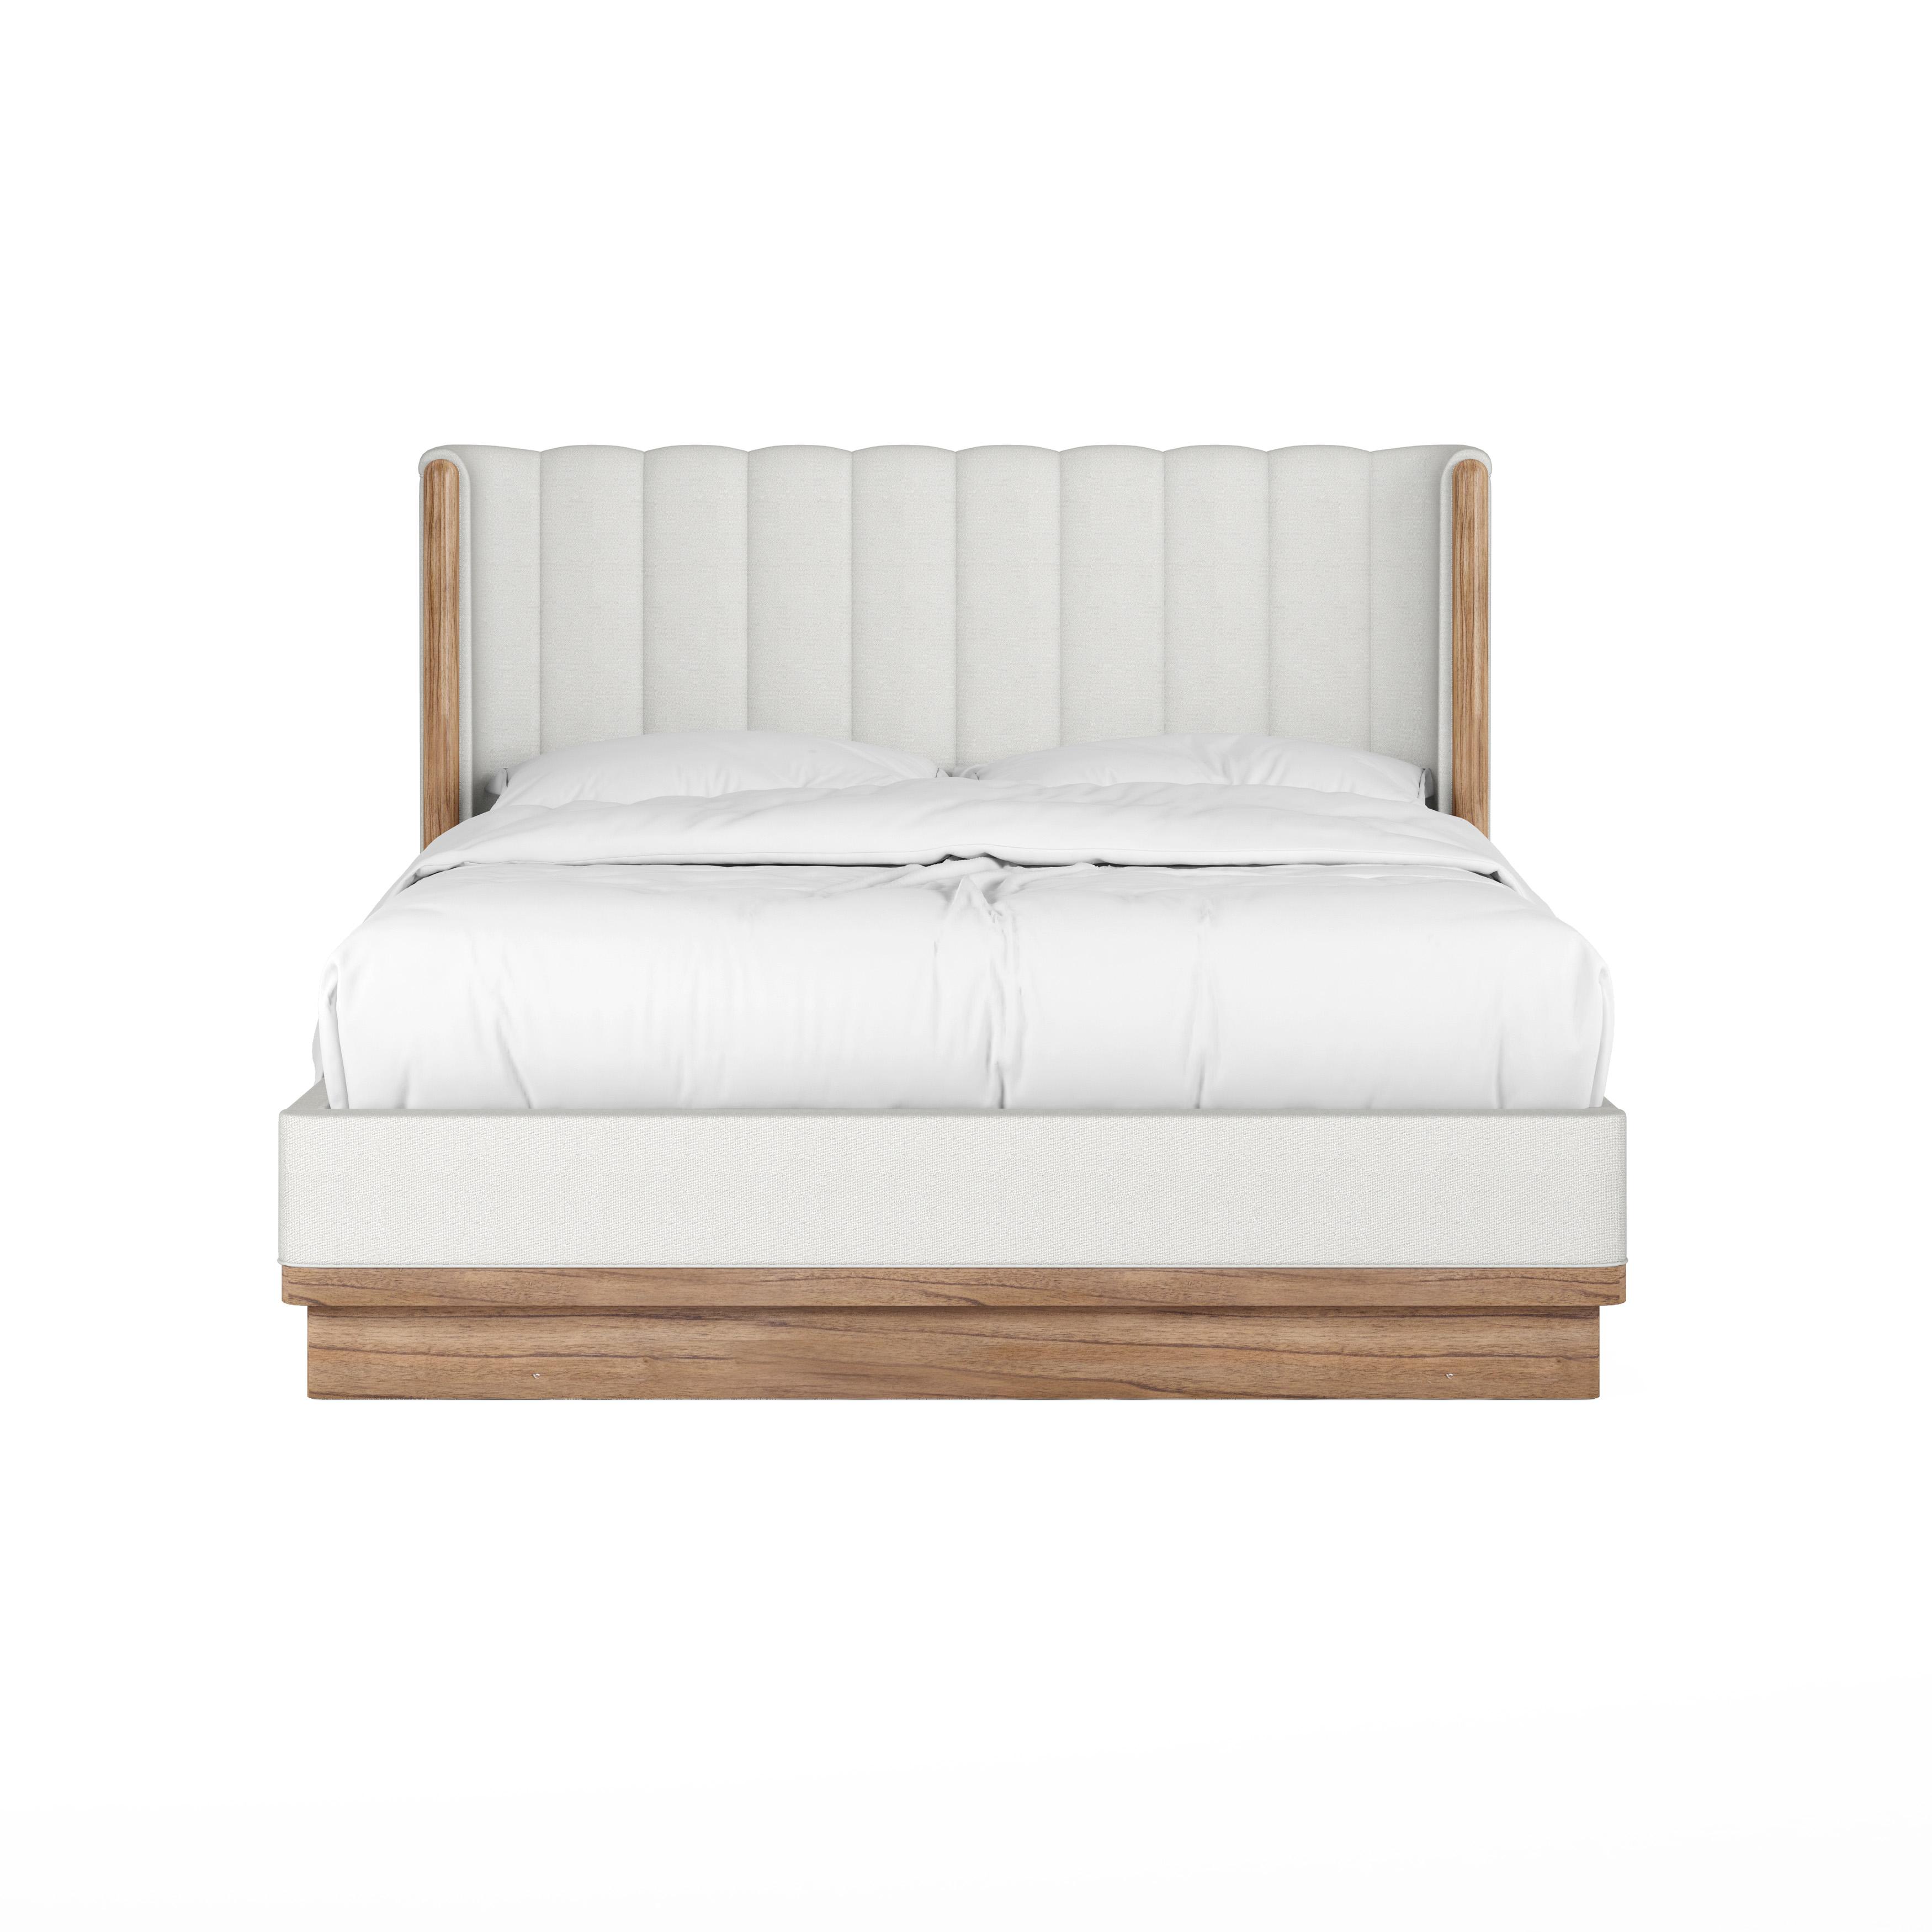 Traditional, Casual Panel Bed Portico 323136-3335 in White, Brown 